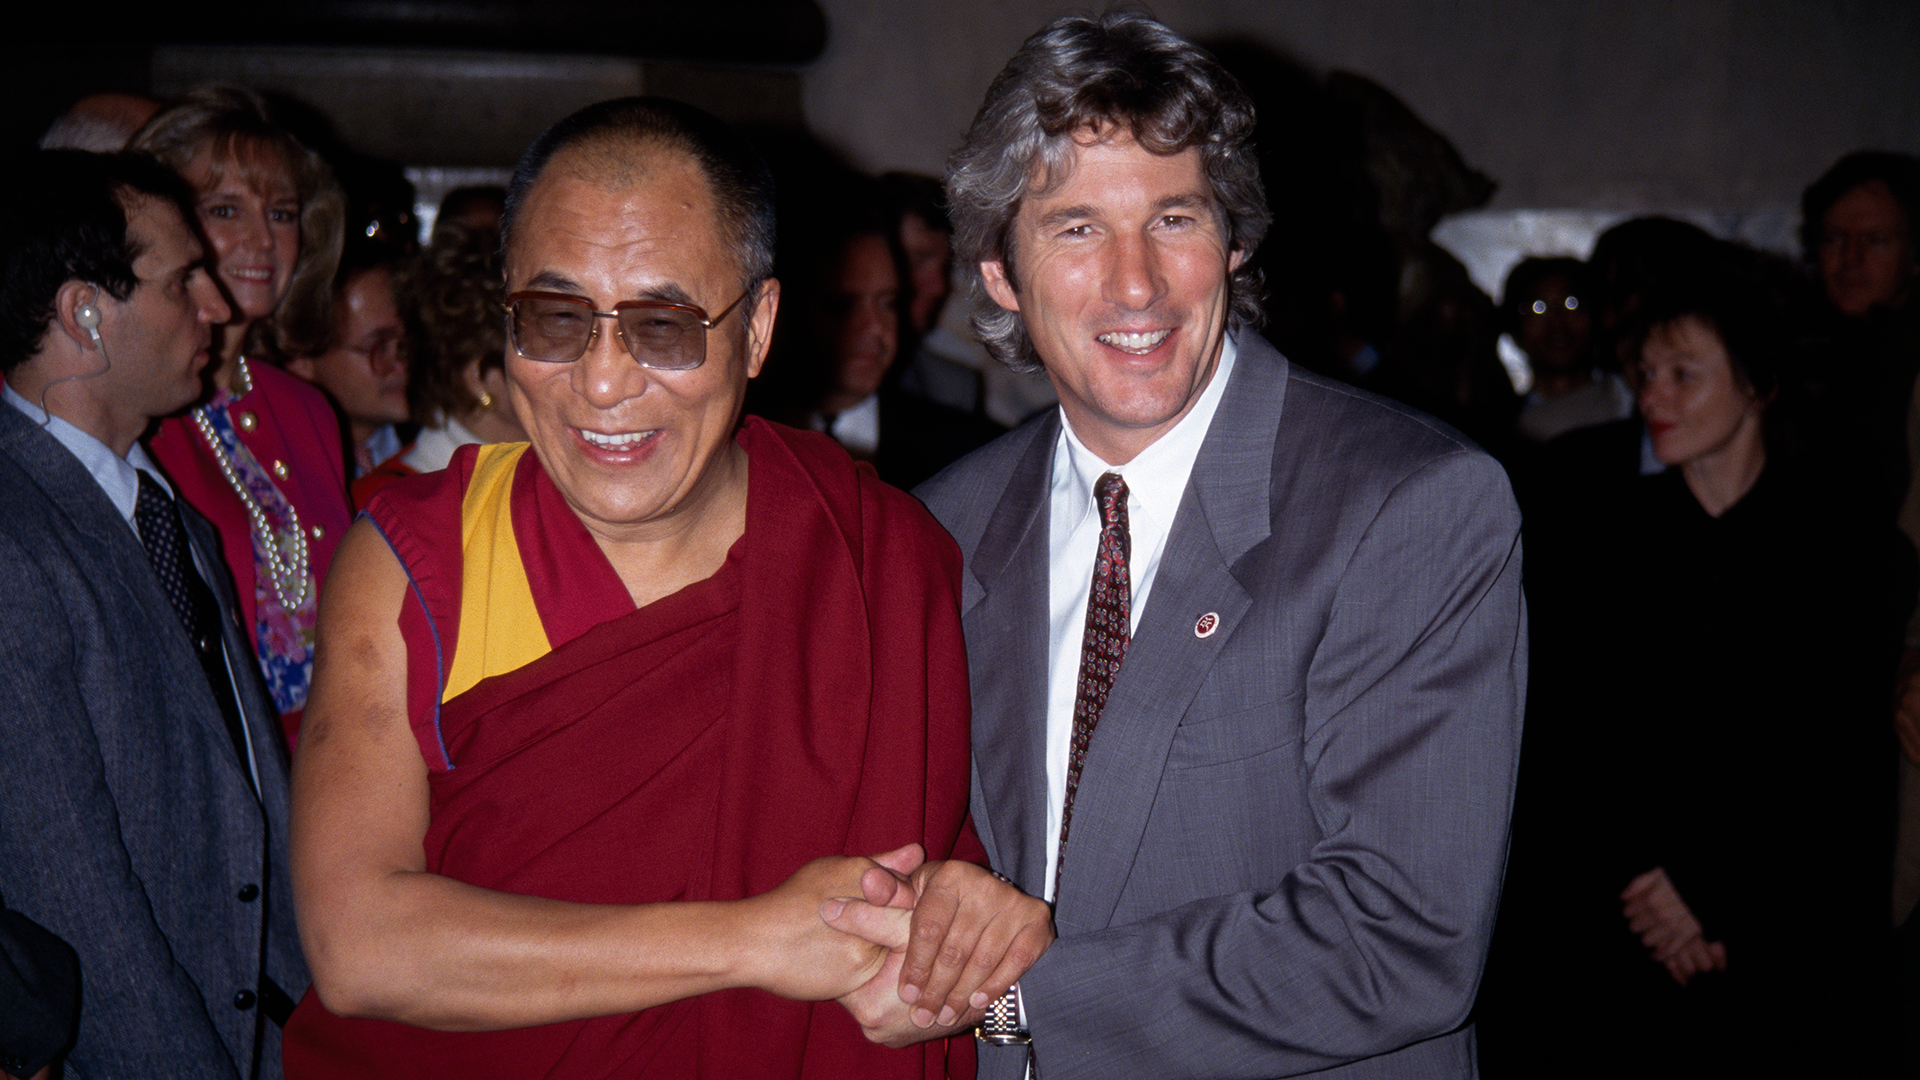 Gere Is A Regular Visitor To The Dalai Lama In Terms Of Buddhism (Getty).